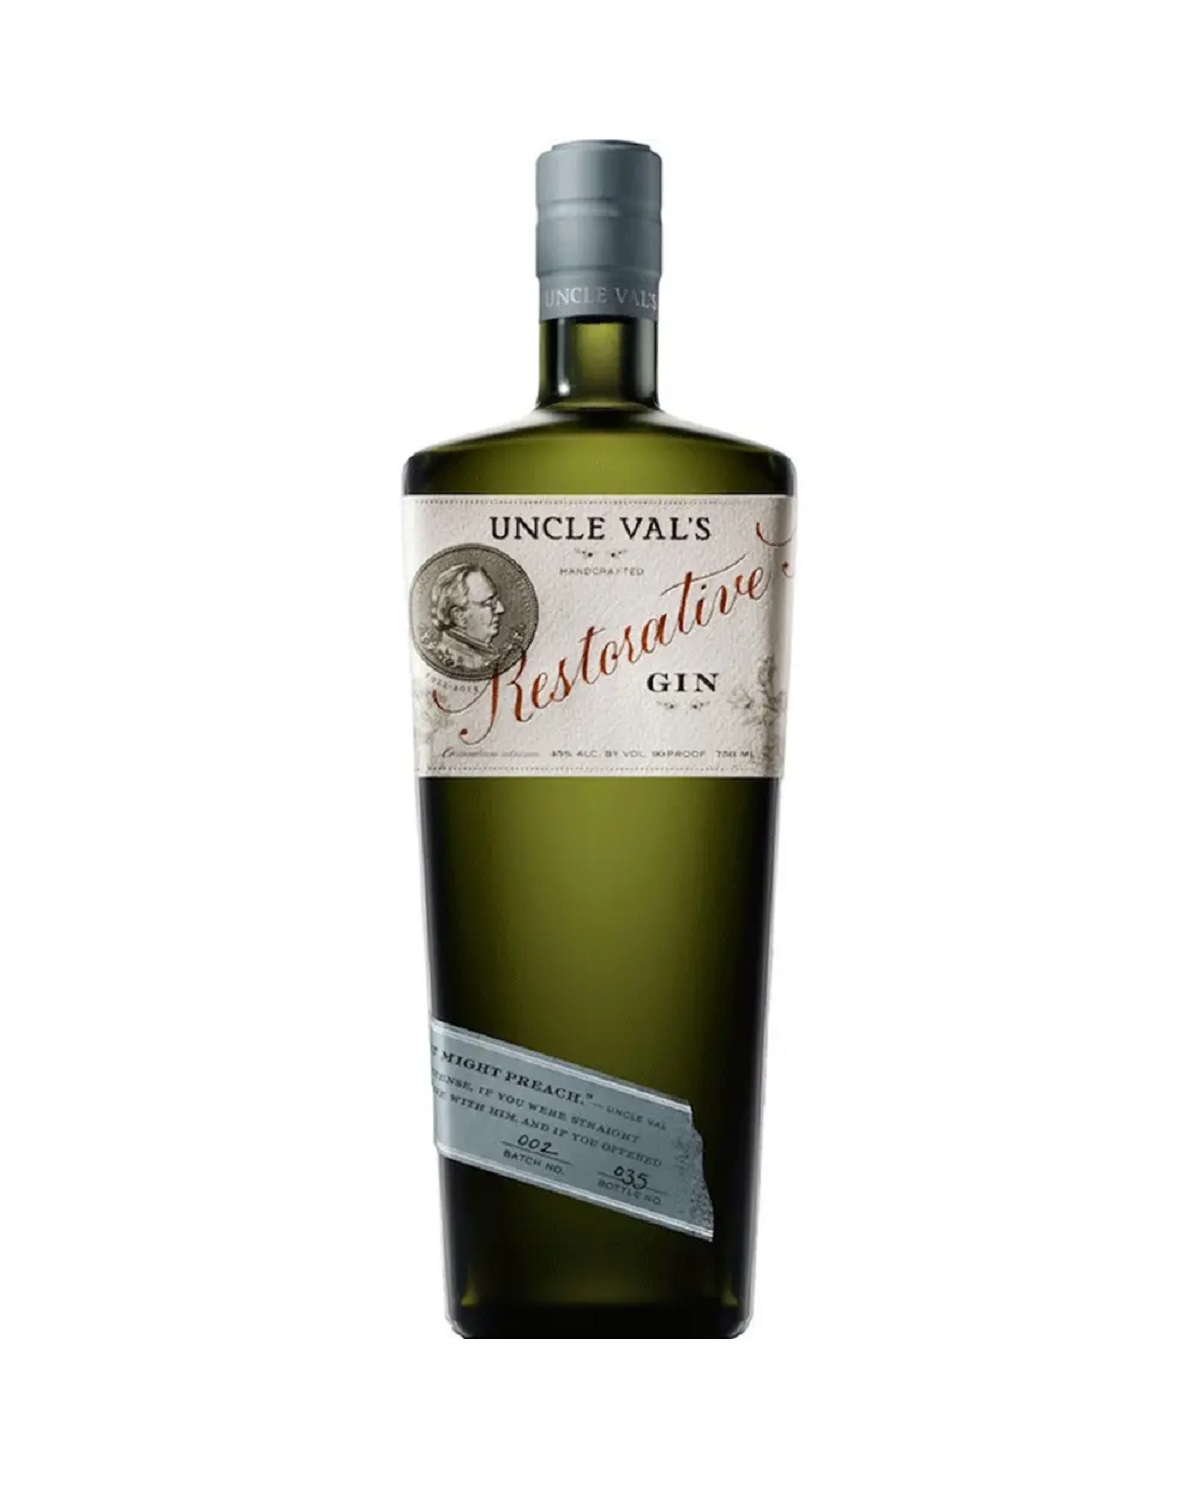 UNCLE VAL'S RESTORATIVE GIN 750ML